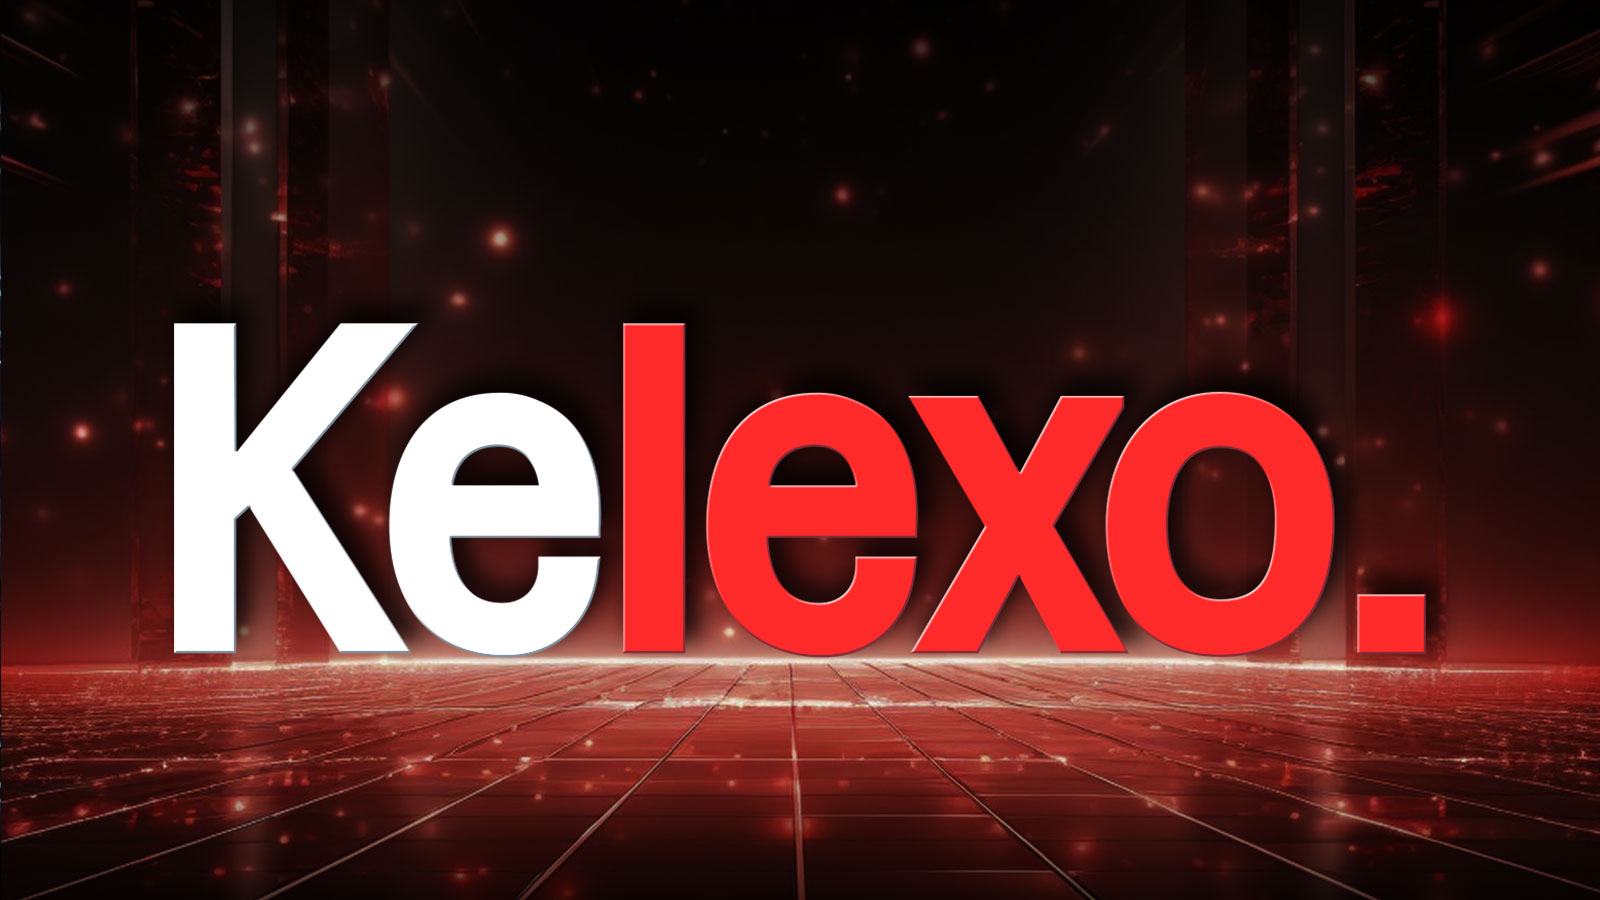 Kelexo (KLXO) Tokensale Ready to Enter New Phase in February as Tron (TRX) and Dogecoin (DOGE) Recovering to Local Highs